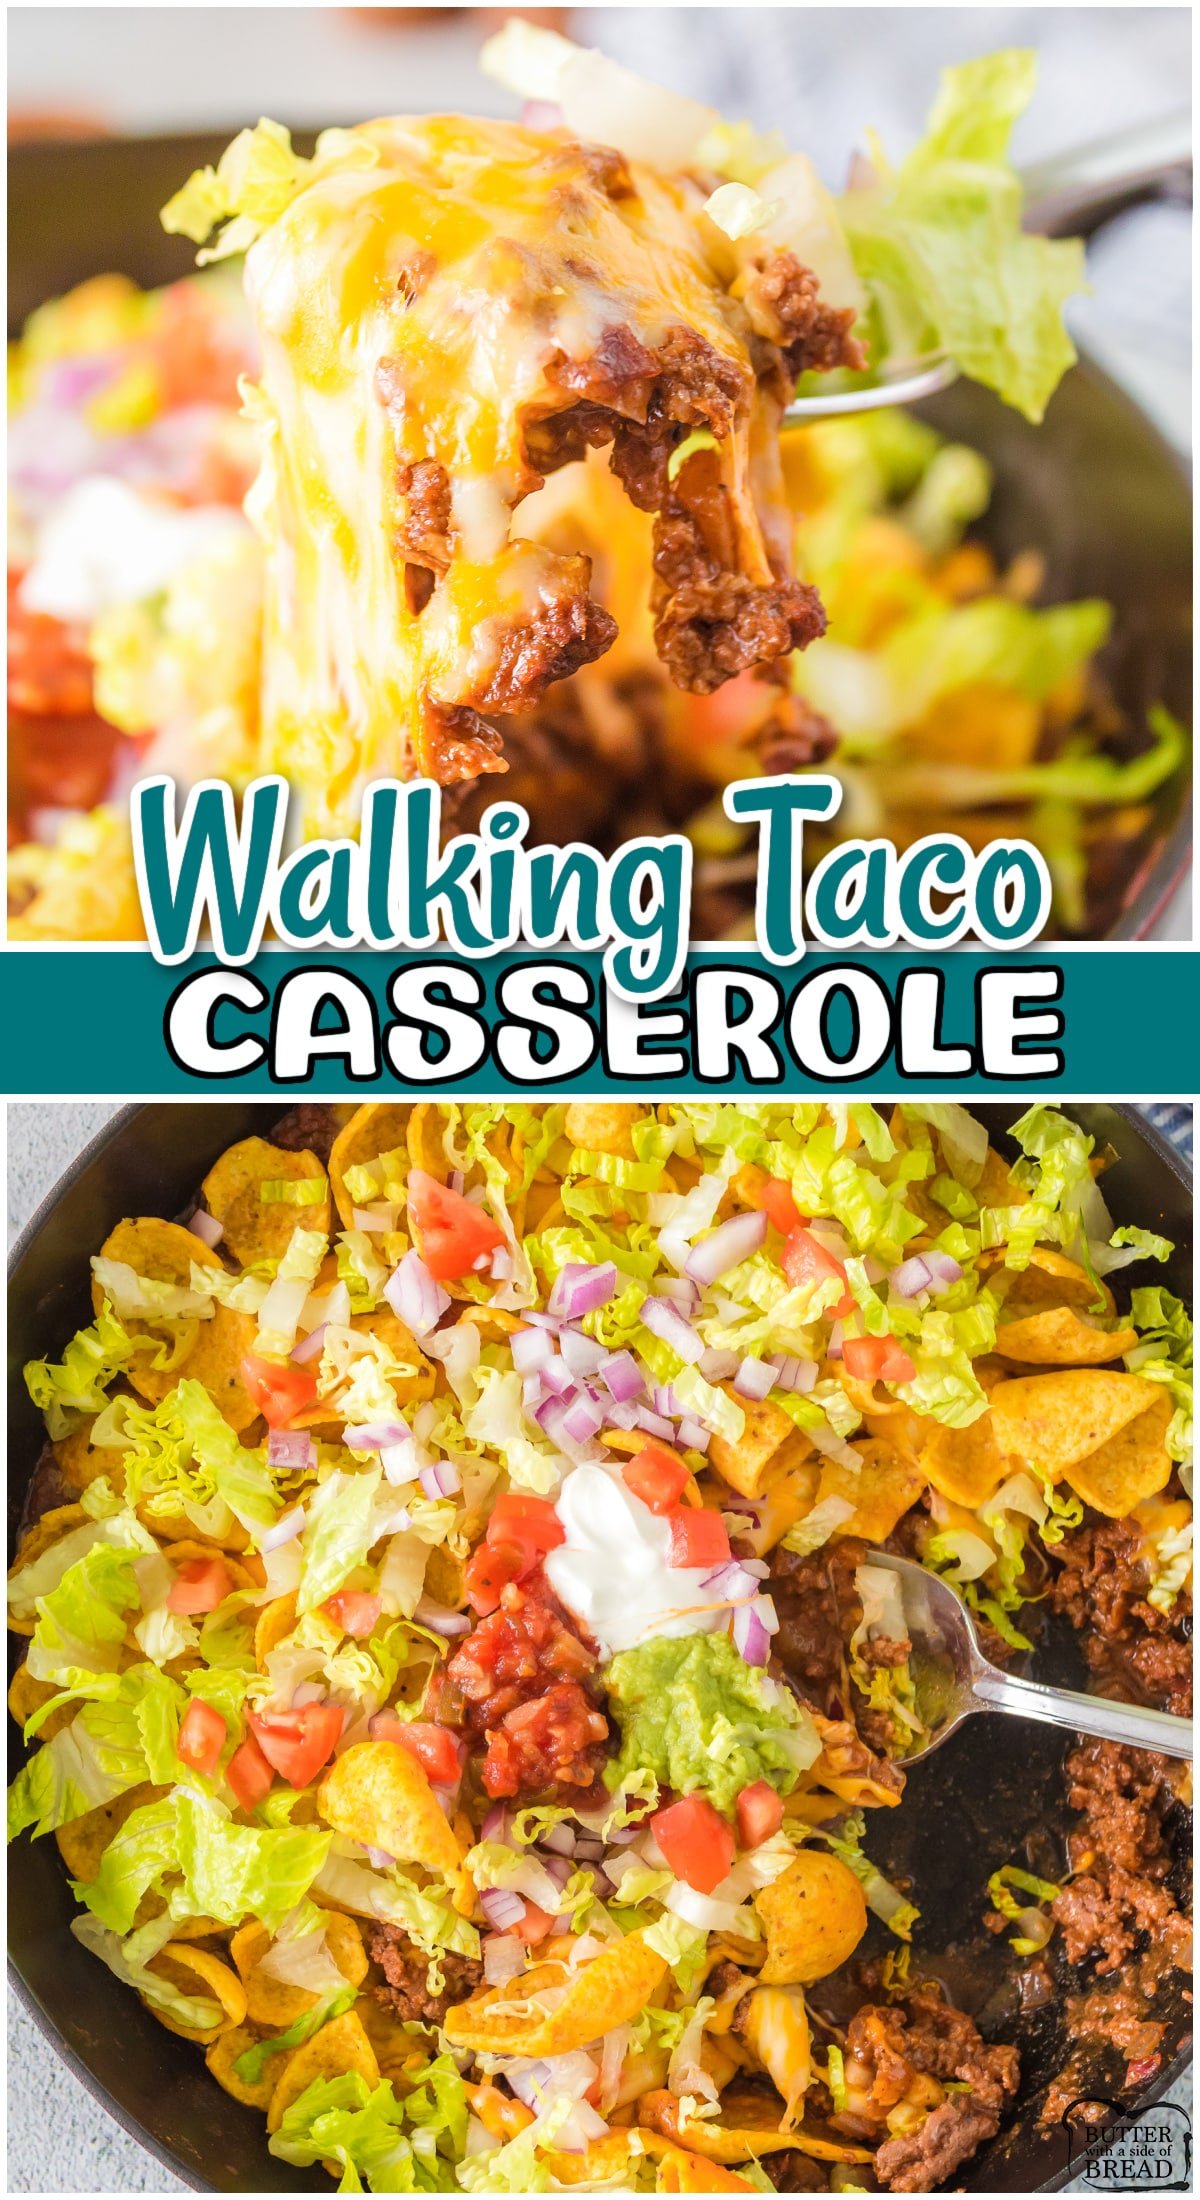 Walking Taco Casserole made with ground beef, salsa & taco seasoning topped with cheese, Fritos chips, lettuce tomato and guac! Scoop it, serve it & enjoy this fun taco casserole!